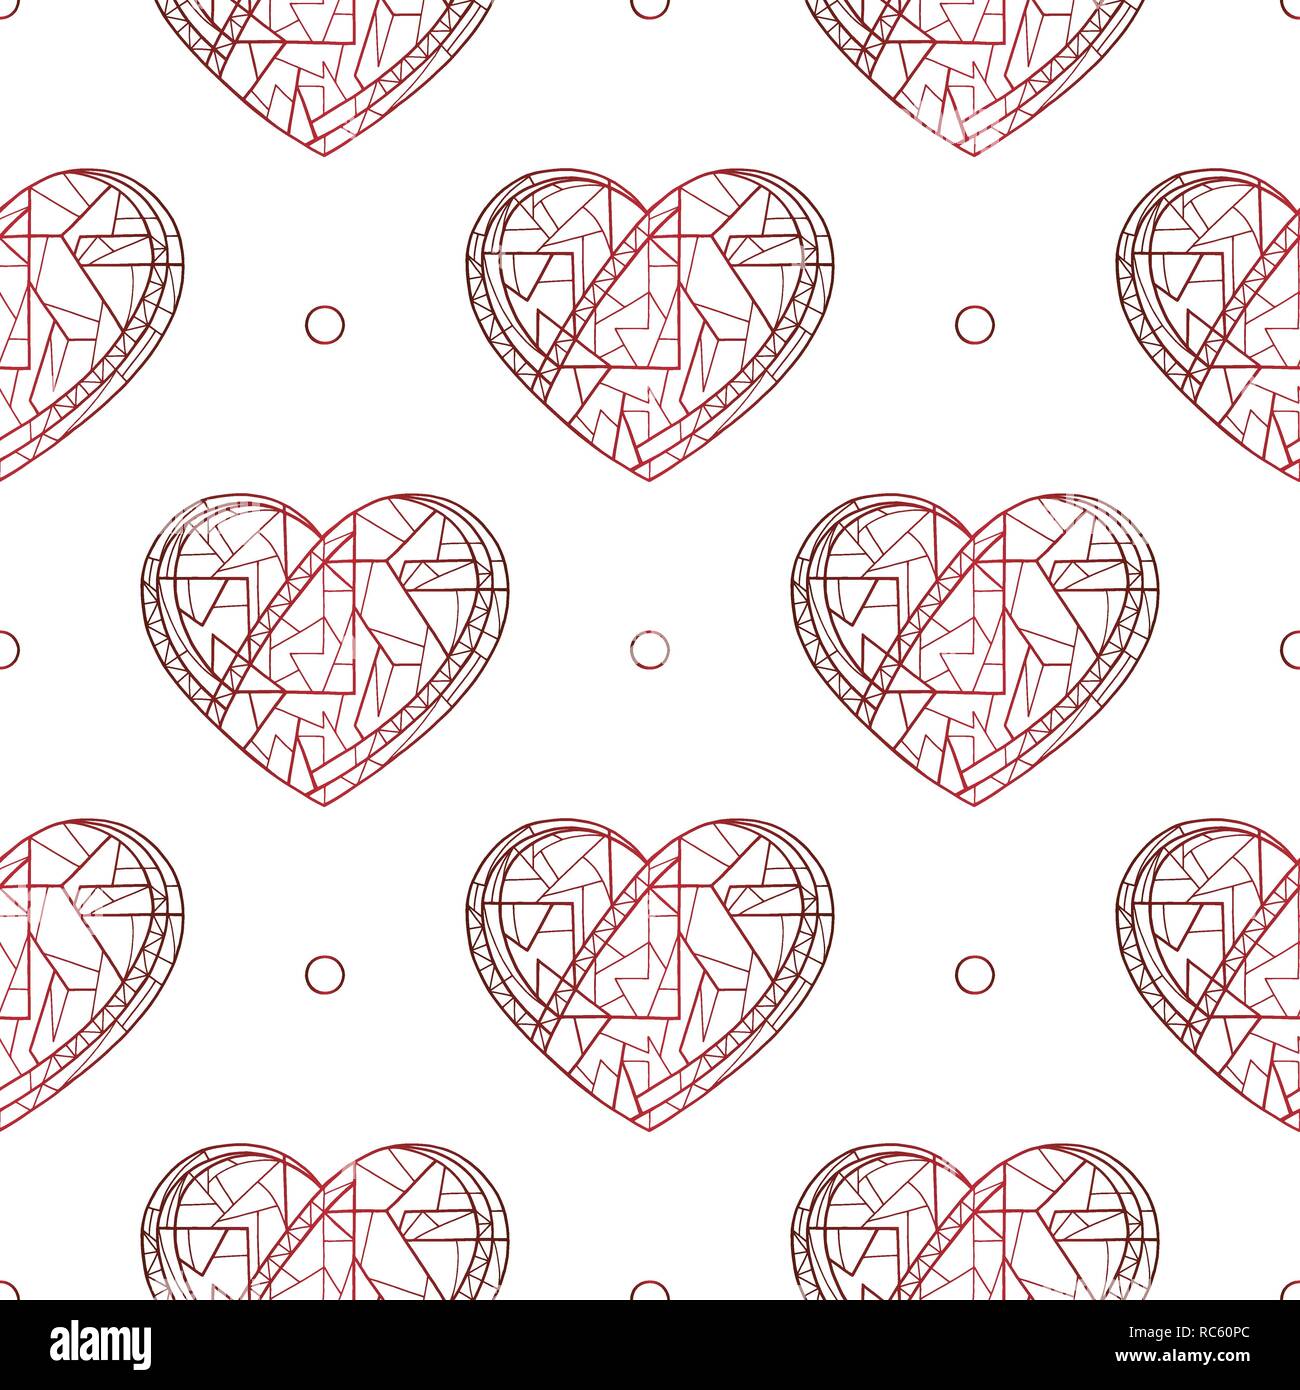 Hearts hand drawn vector seamless pattern. Valentines day holidays background. Love texture for surface design, textile, wrapping paper, wallpaper, ph Stock Vector